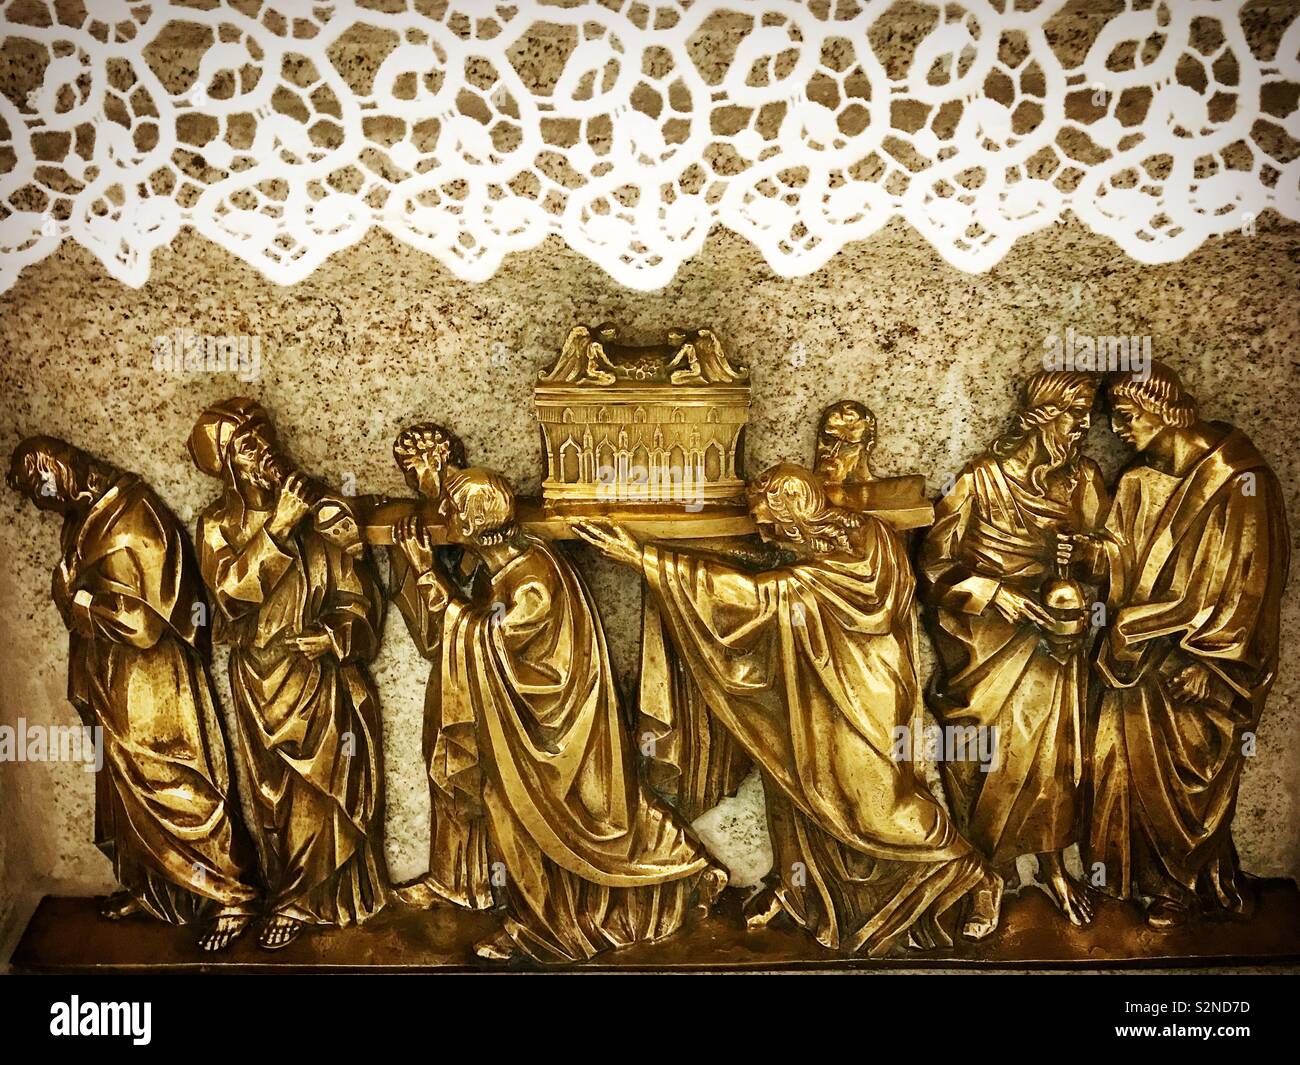 A golden sculpture of people carrying the Arch of the Covenant is displayed in a church in Caceres, Extremadura, Spain Stock Photo